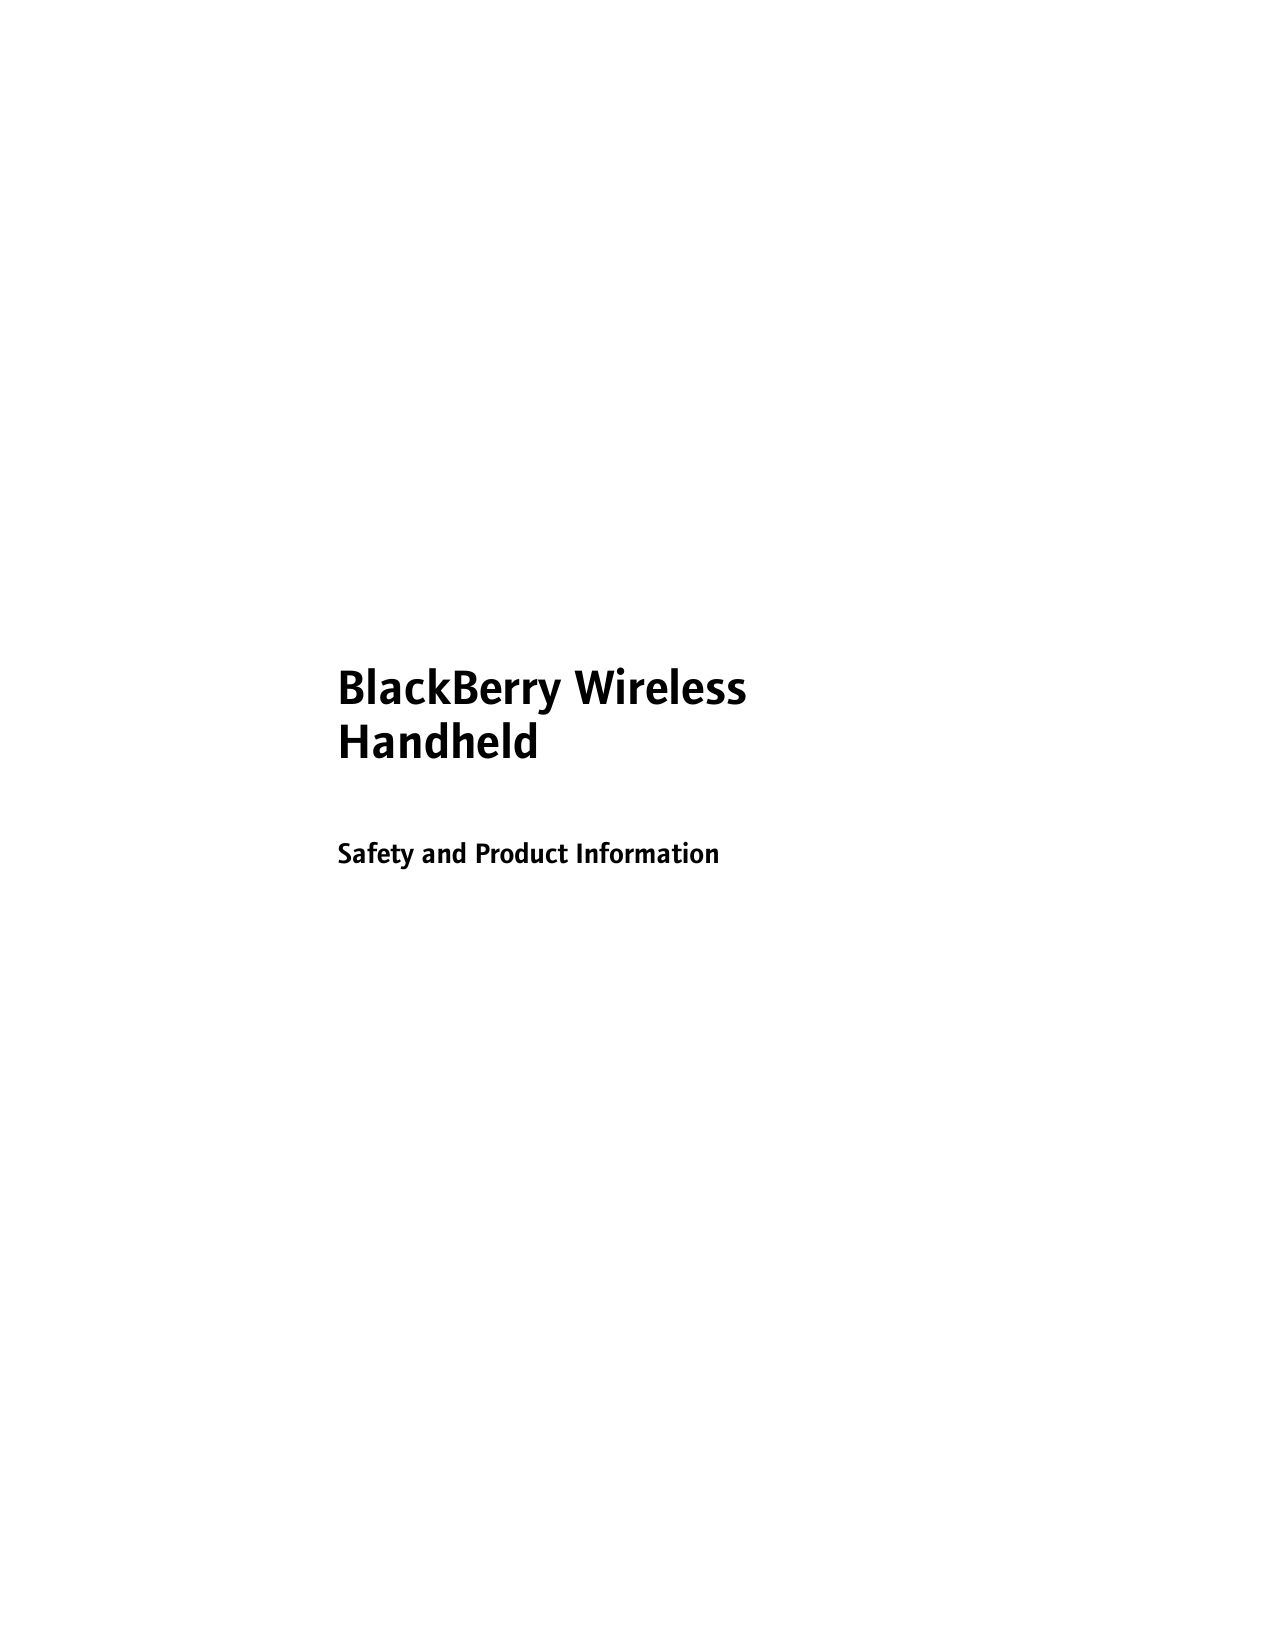 BlackBerry Wireless HandheldSafety and Product Information